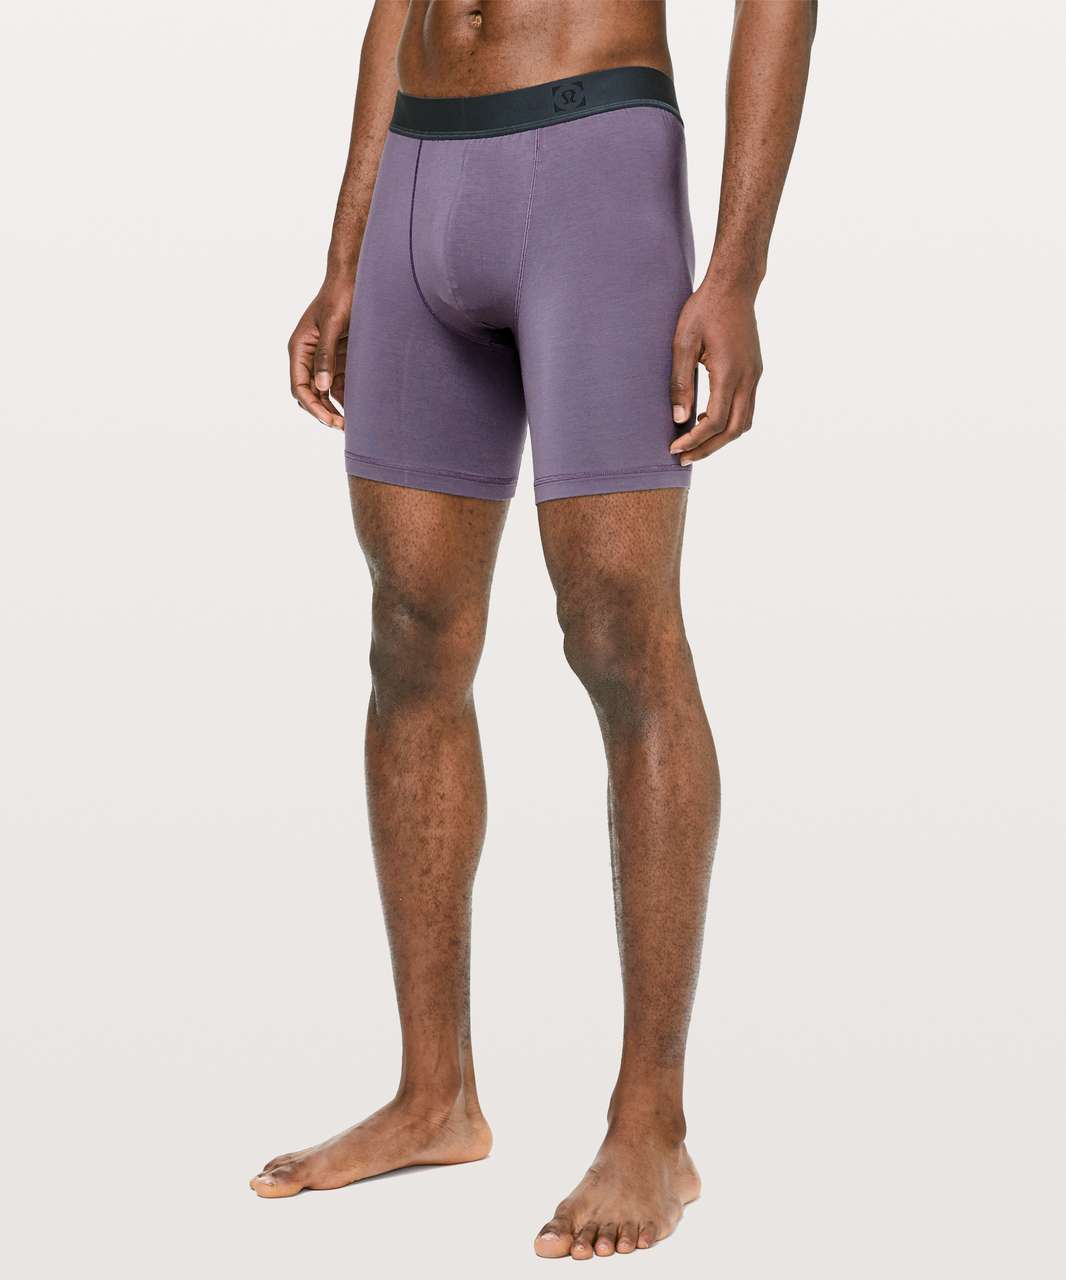 Lululemon Always In Motion Boxer *The Long One 7" - Graphite Purple